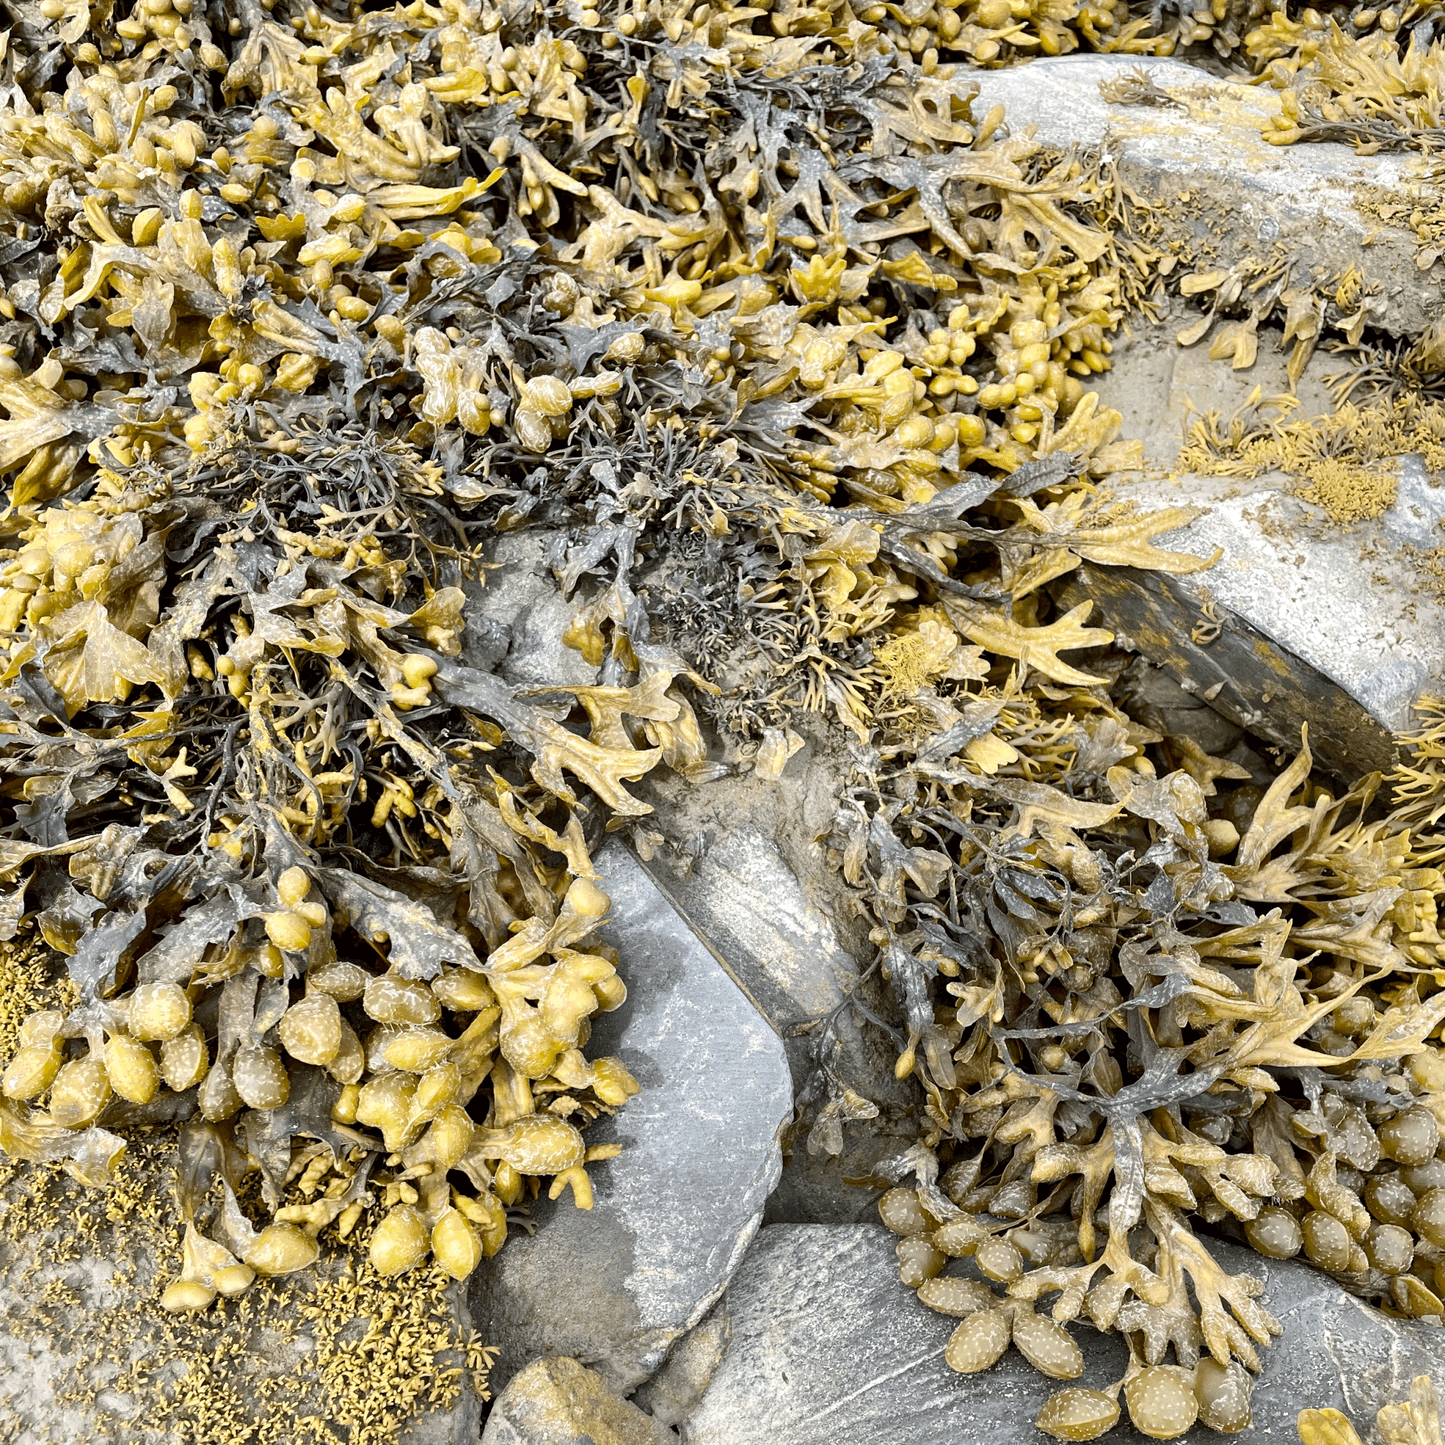 Seaweed, lichen and moss on rocks at the shore.